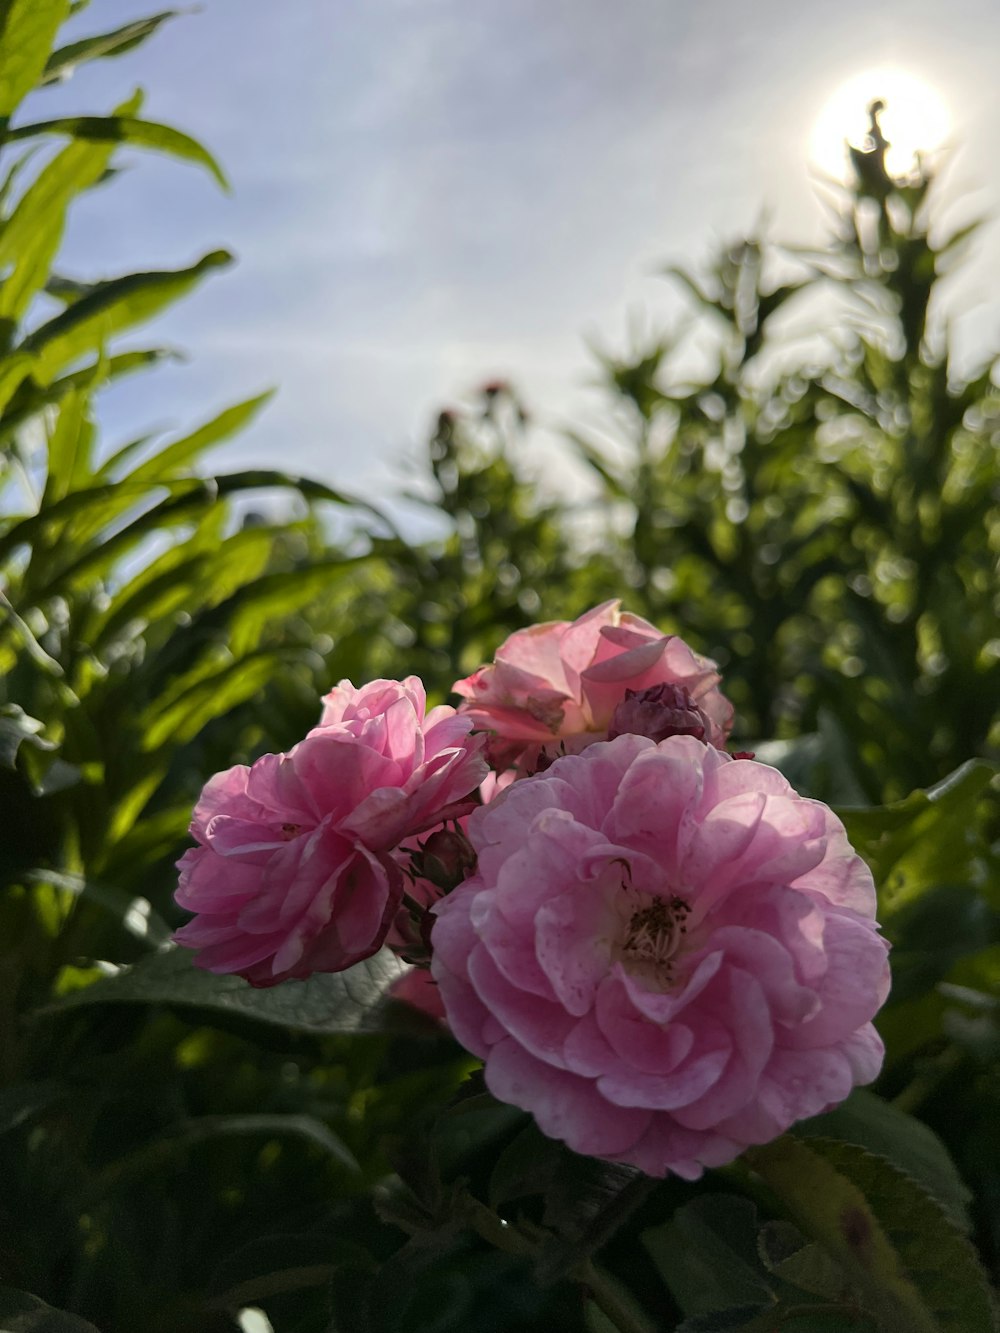 pink flowers are blooming in a field